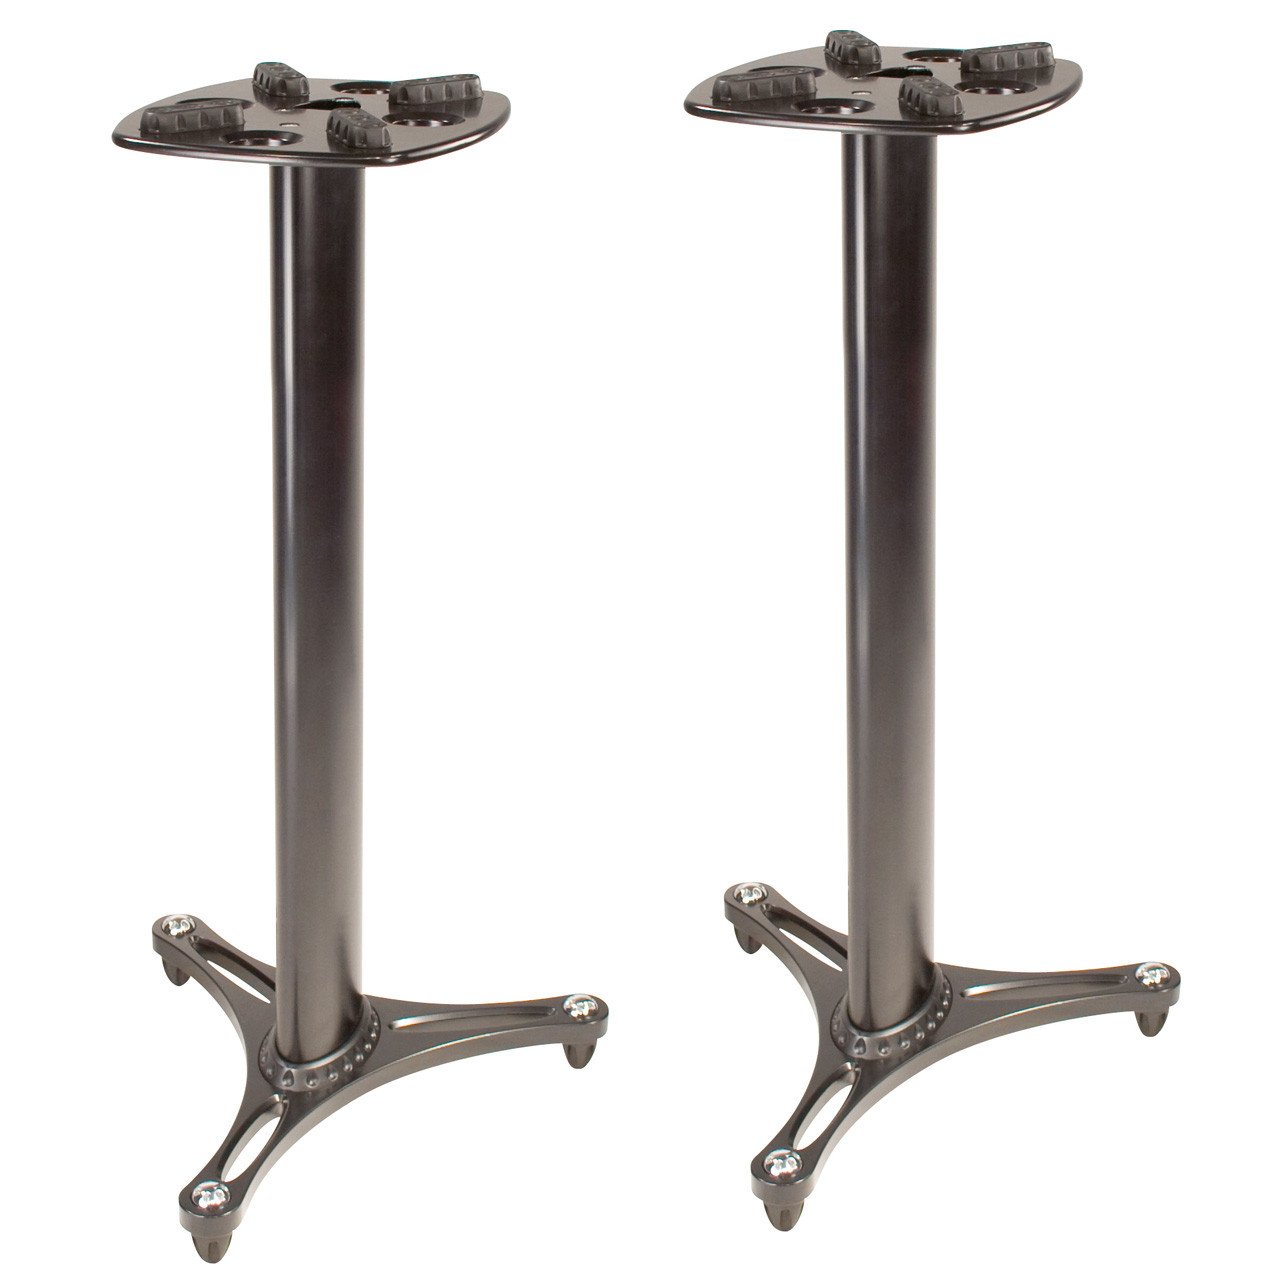 Studio Monitor Stands - Ultimate Support MS-90/36B Studio Monitor Stands